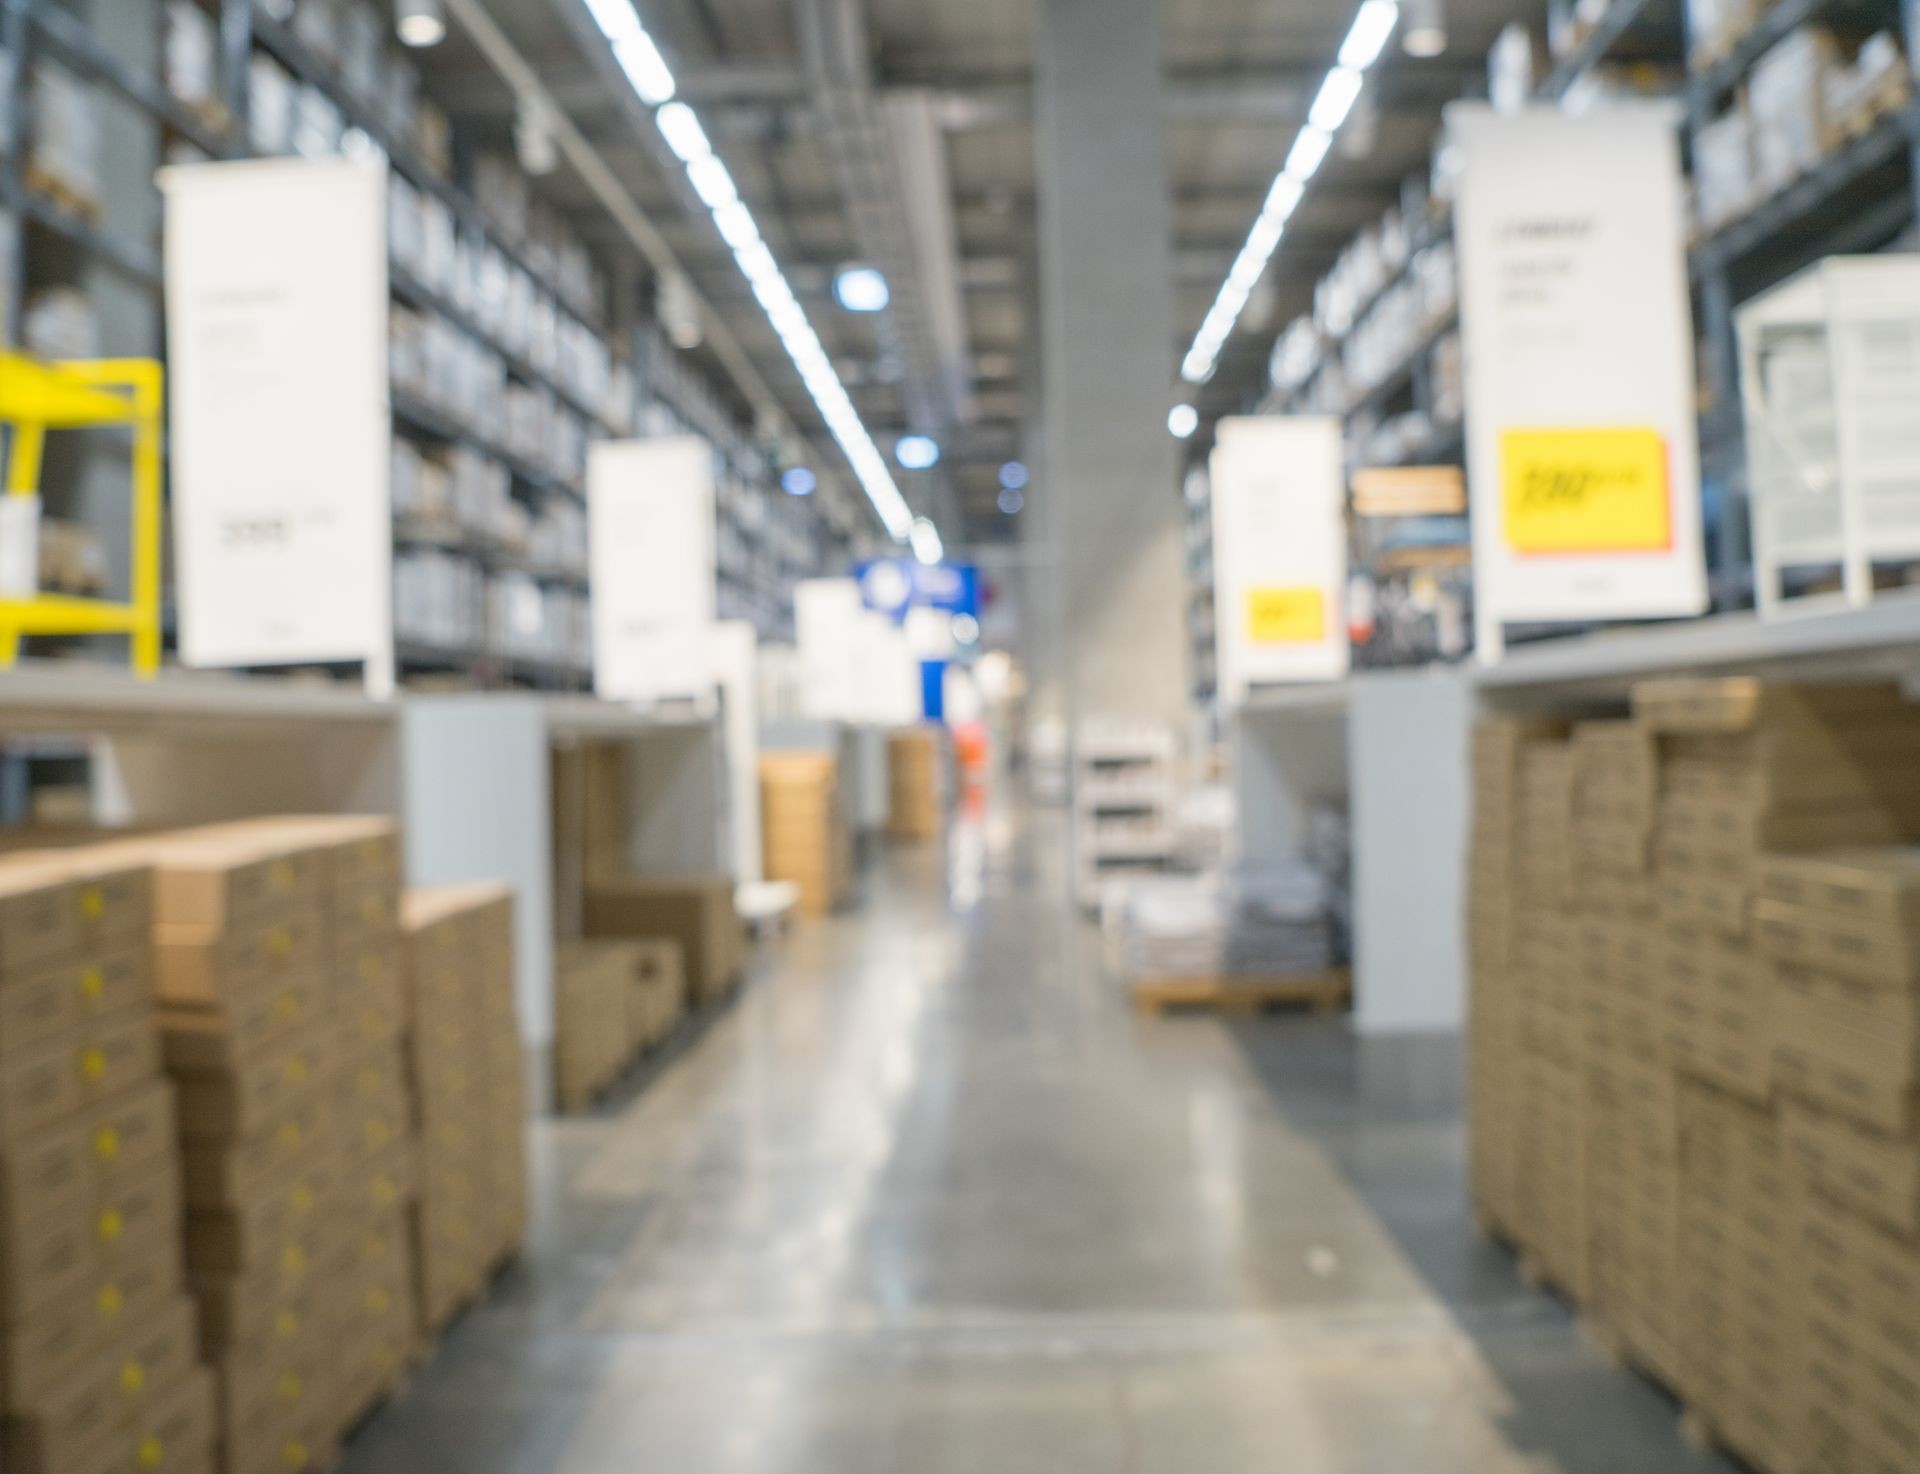 Blurred image of stock inventory shelf, stack of carton boxes, modern logistics smart warehouse management. For wholesale distributor, ecommerce, commercial business or supply chain background concept